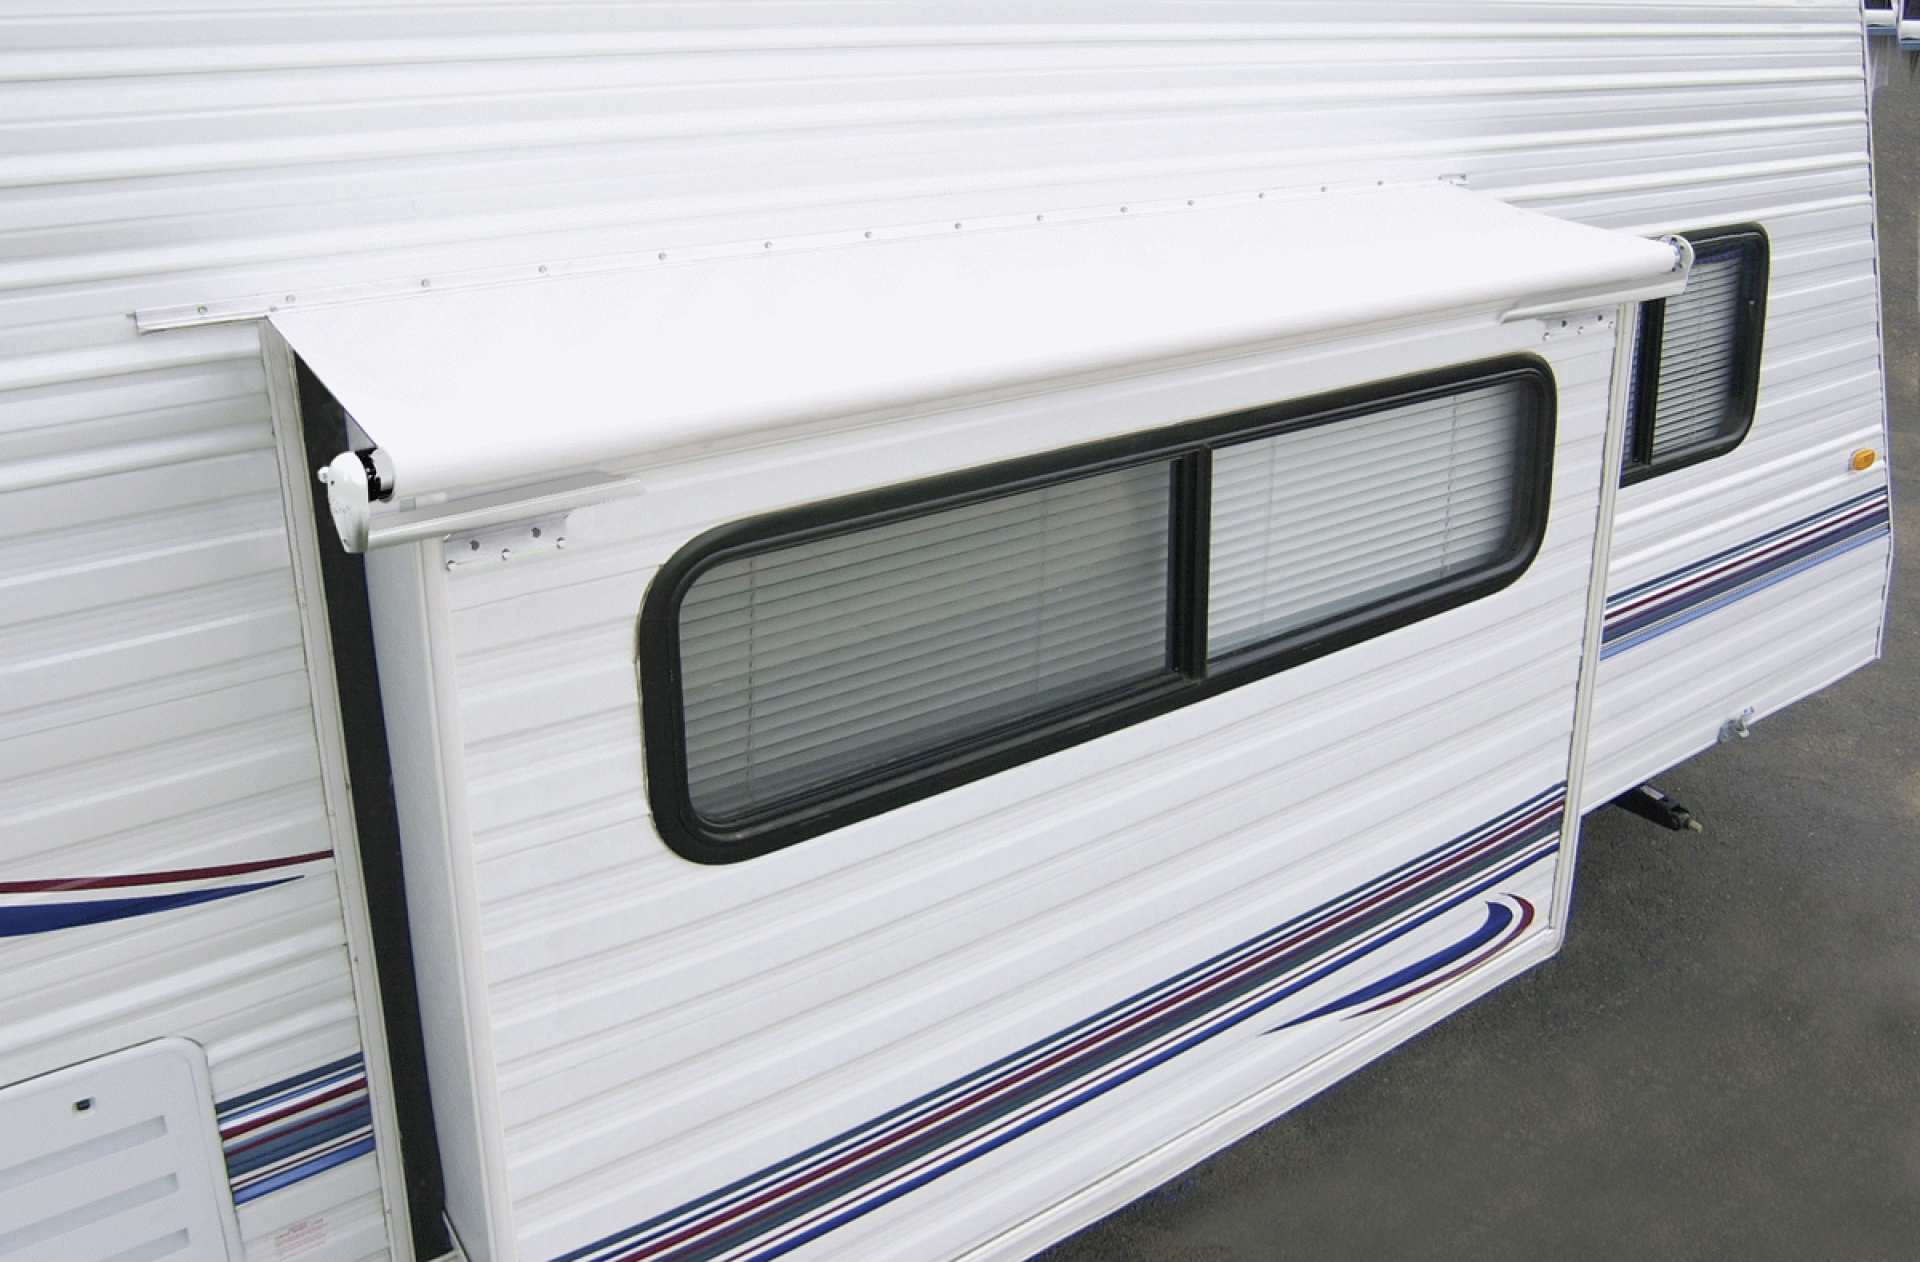 CAREFREE OF COLORADO | LH1210042 | SLIDEOUT COVER AWNING 114" - 121.9" ROOF RANGE WHITE VINYL